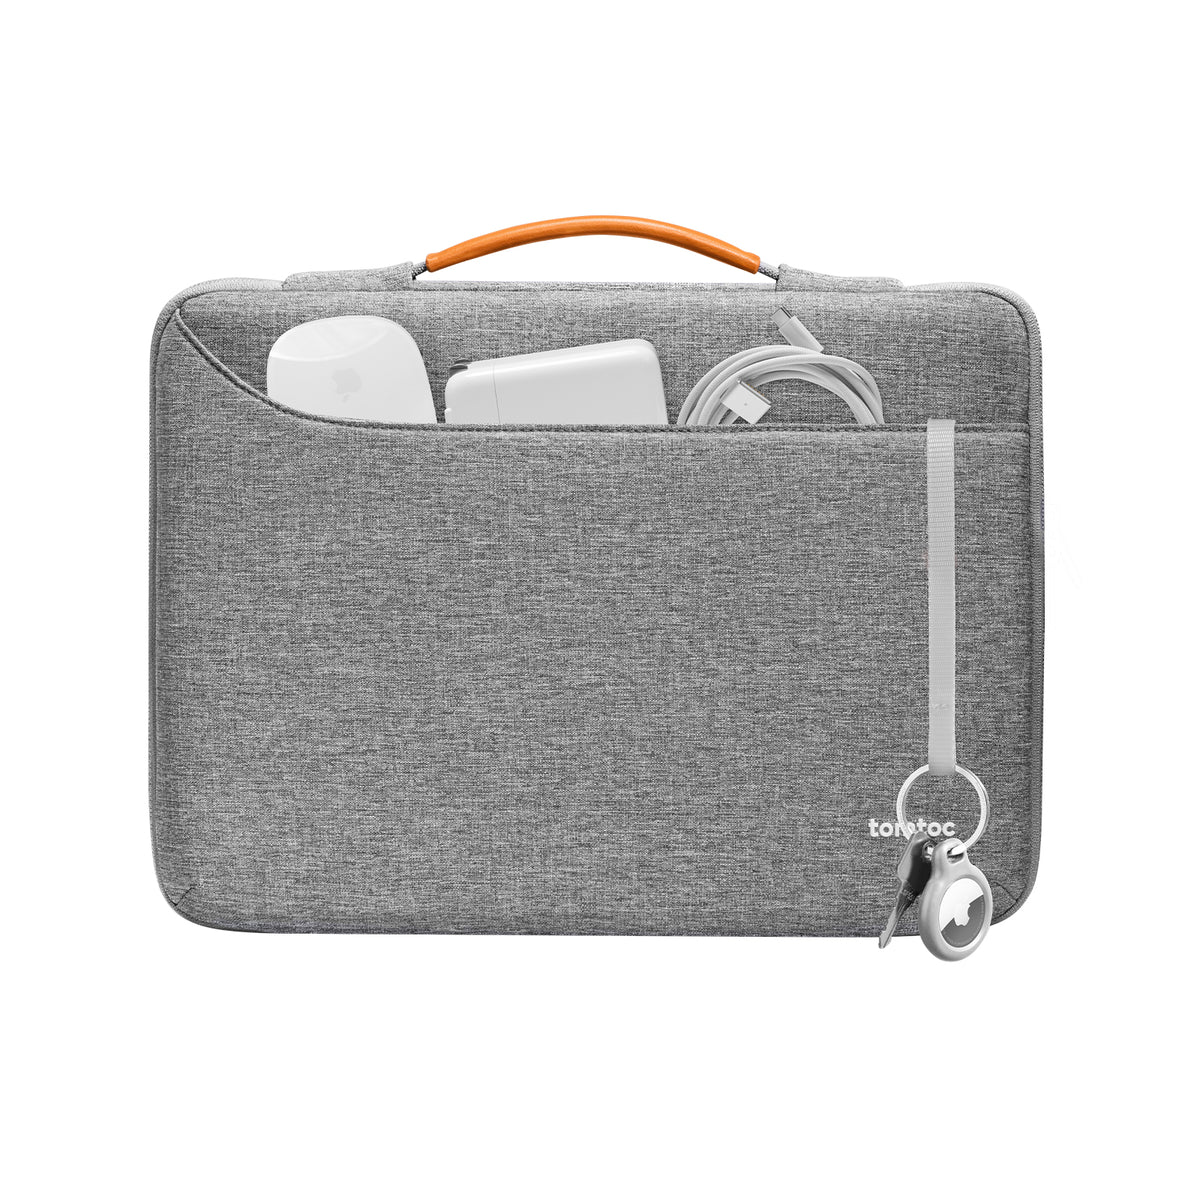 secondary_Defender-A22 Laptop Briefcase For 13-inch MacBook Air / Pro | Gray